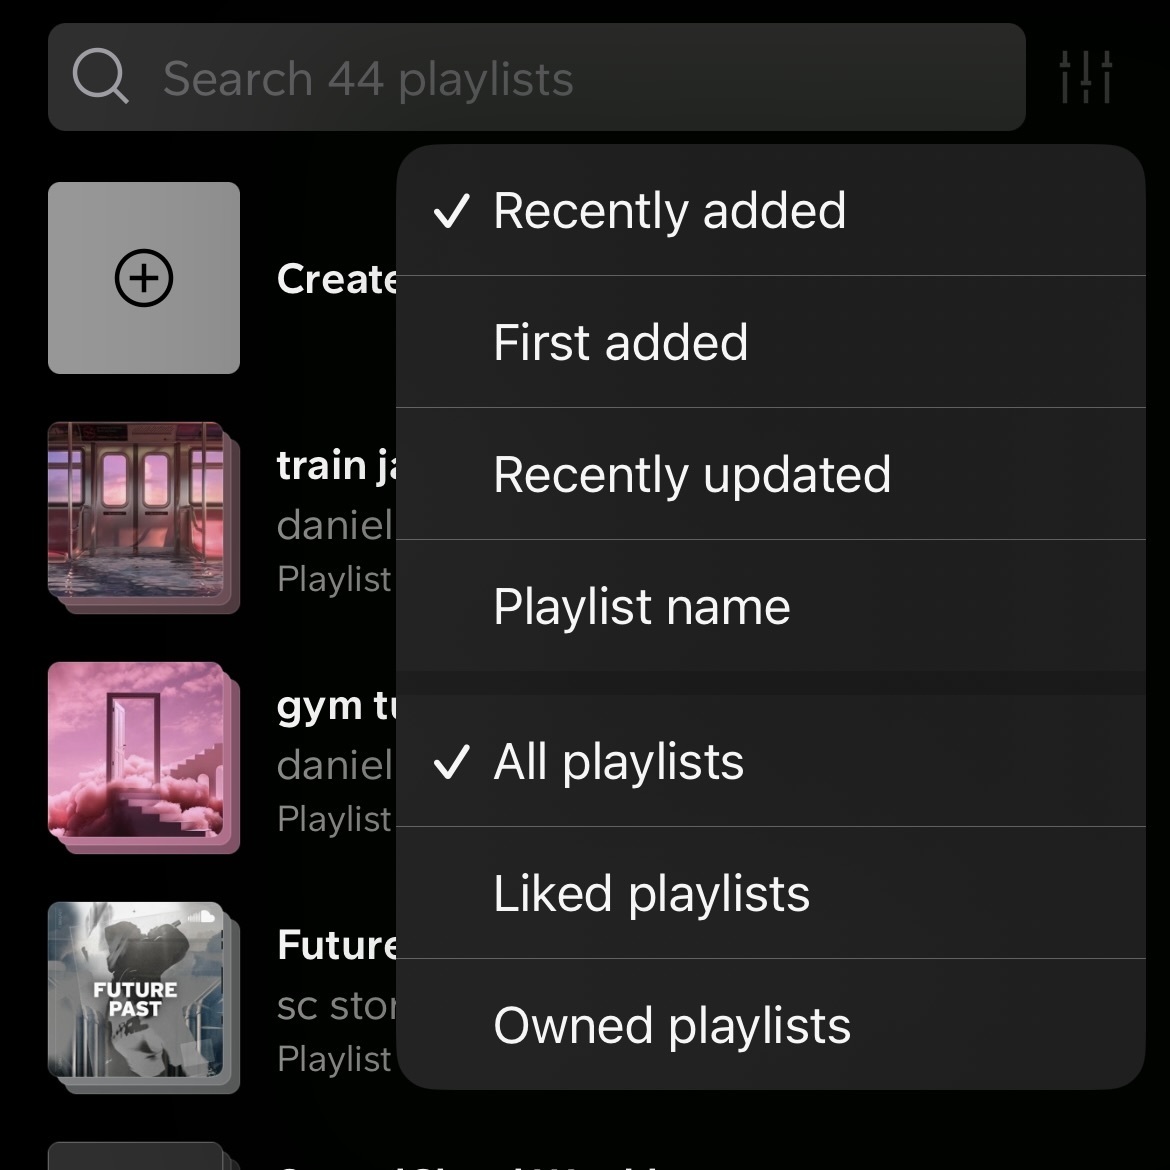 New features on SoundCloud this month: — New Feed: Scroll through track previews, recommended for you — New feature on iOS: Sort and filter your library — New widget feature: Now Playing — New feature: First Fans recommends your uploads in front of new fans right away